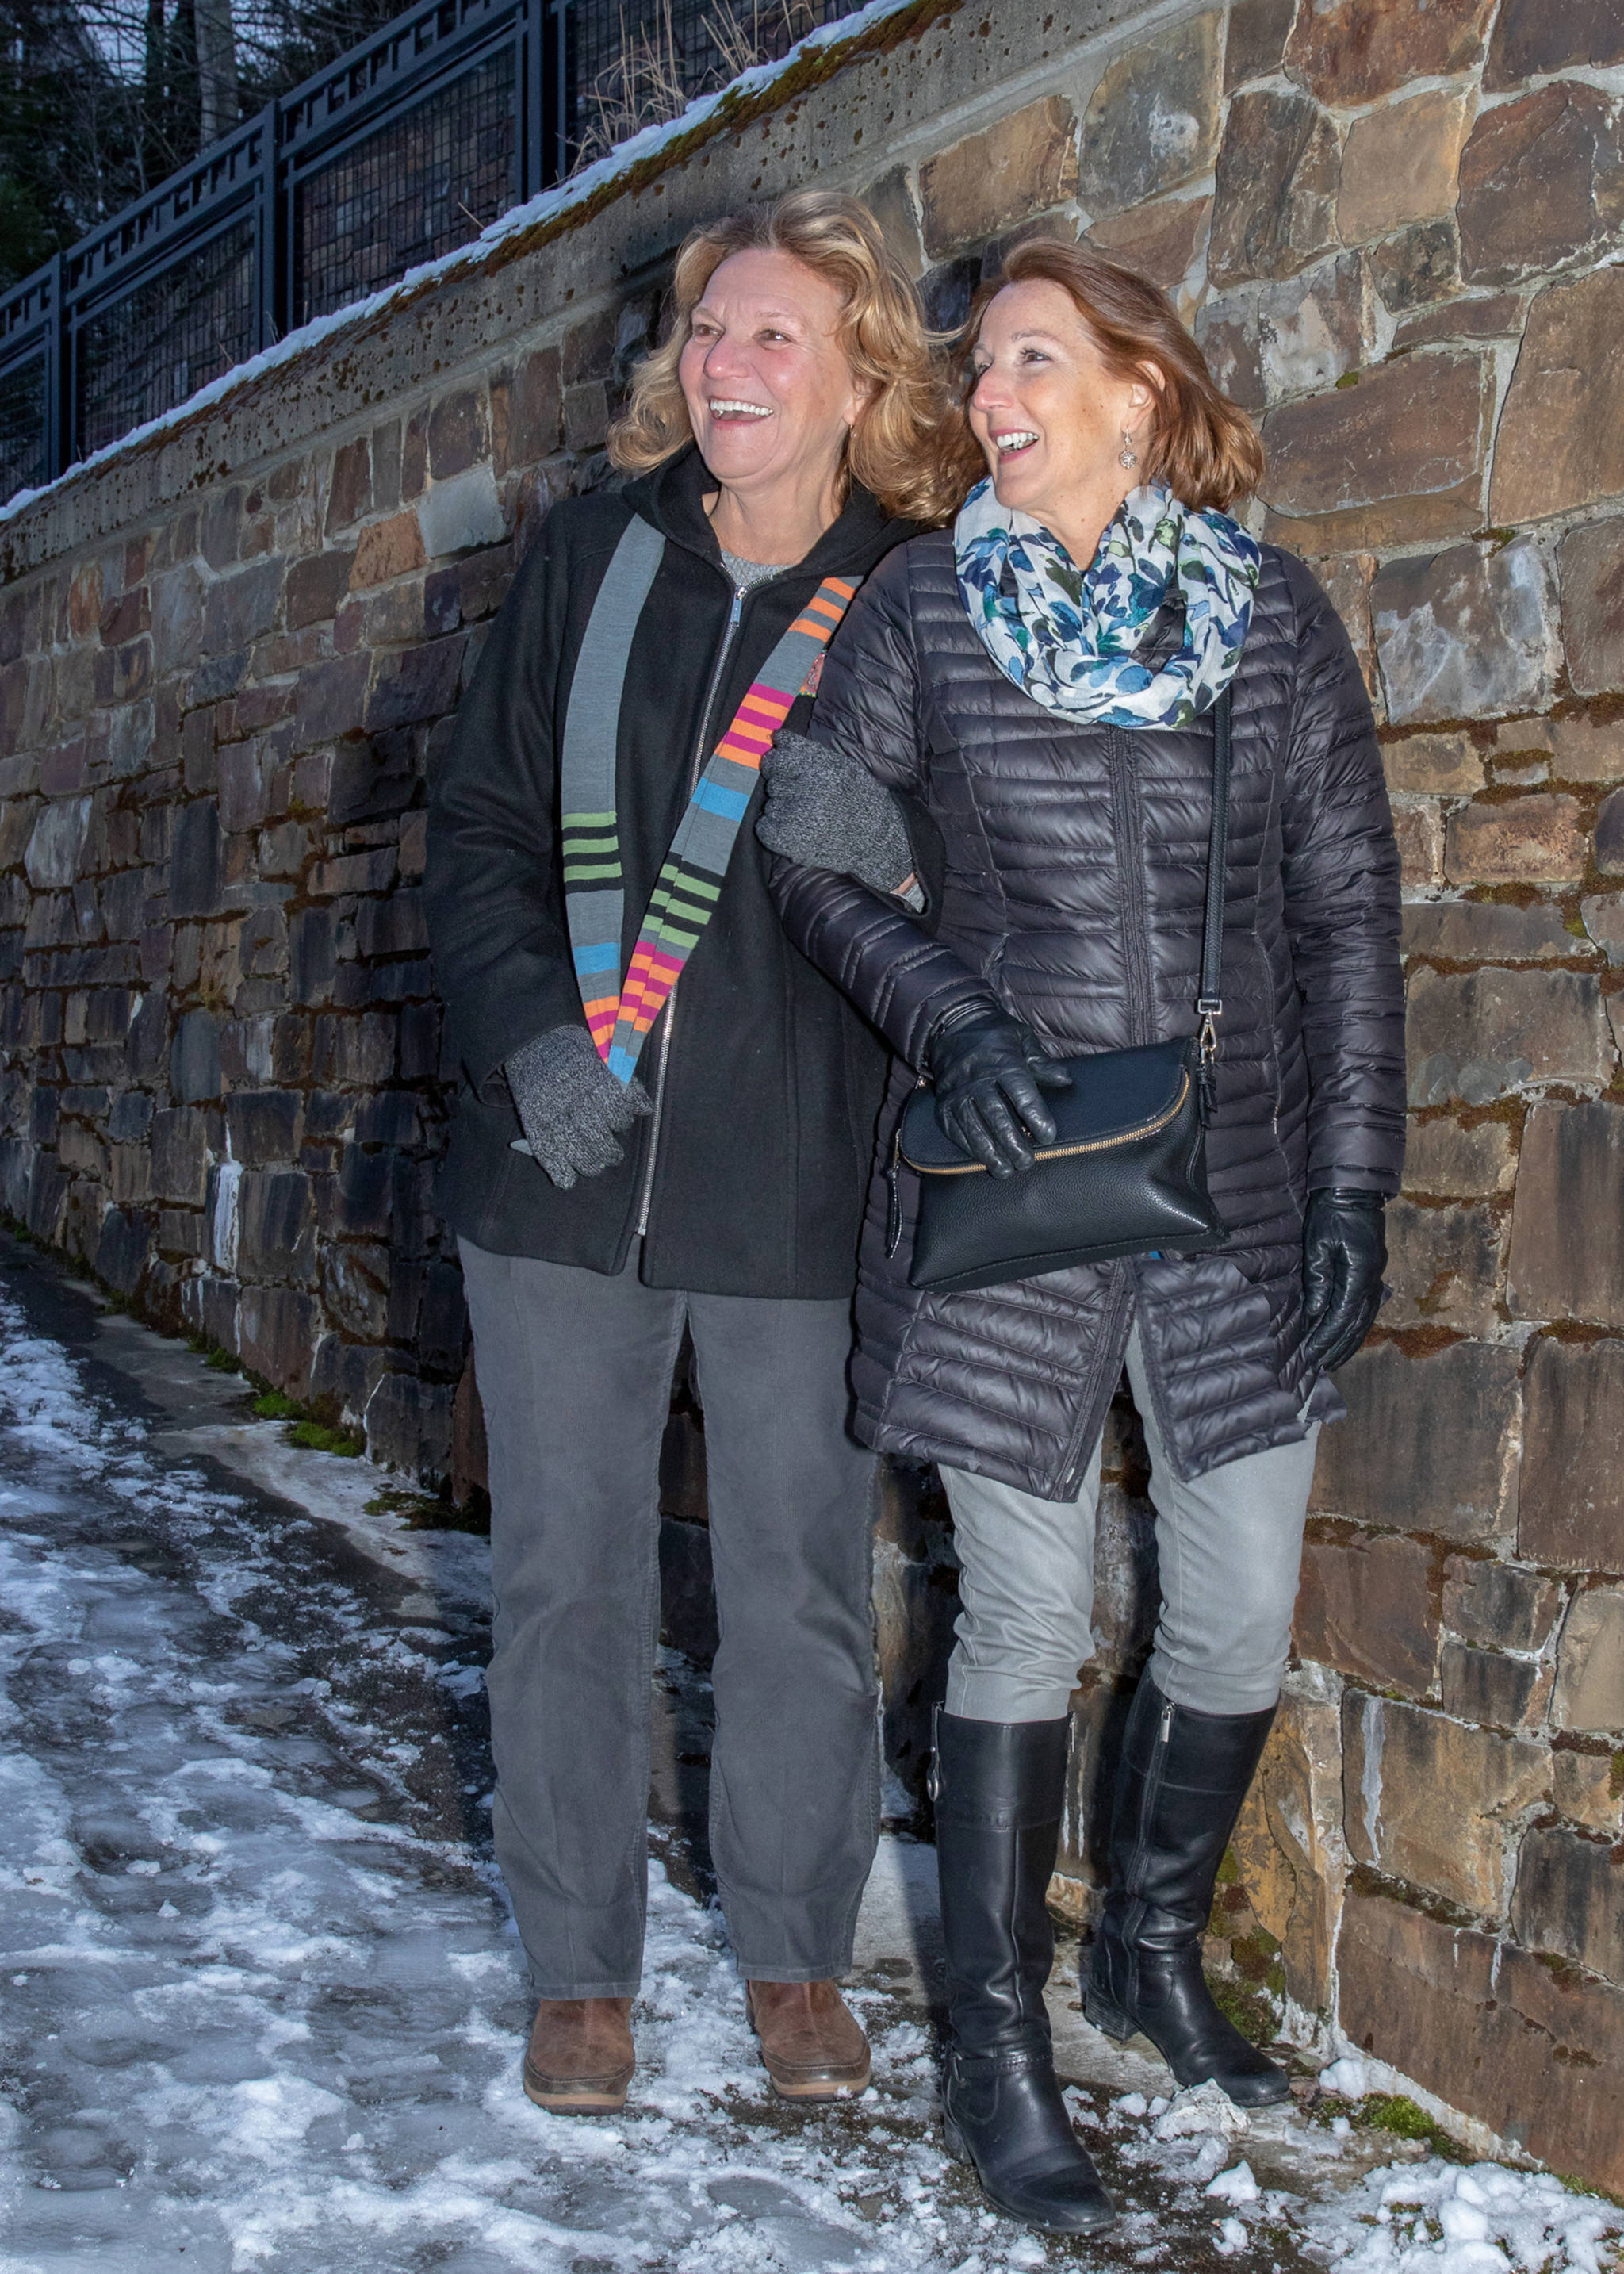 Jan. 13, 2019: Neither rain, nor sleet, nor Taku winds can keep these longtime friends and walking buddies from an outing. Even on the worst weather days, they manage to look great. Sandy’s outfit includes a London Fog coat and Dockers pants, accessorized with Merrell shoes and a multi-colored Smartwool scarf and gloves. Mary Lou sports a Patagonia jacket, NYDJ pants, Bandolino boots, with a scarf from JJill and purse by Kate Spade.